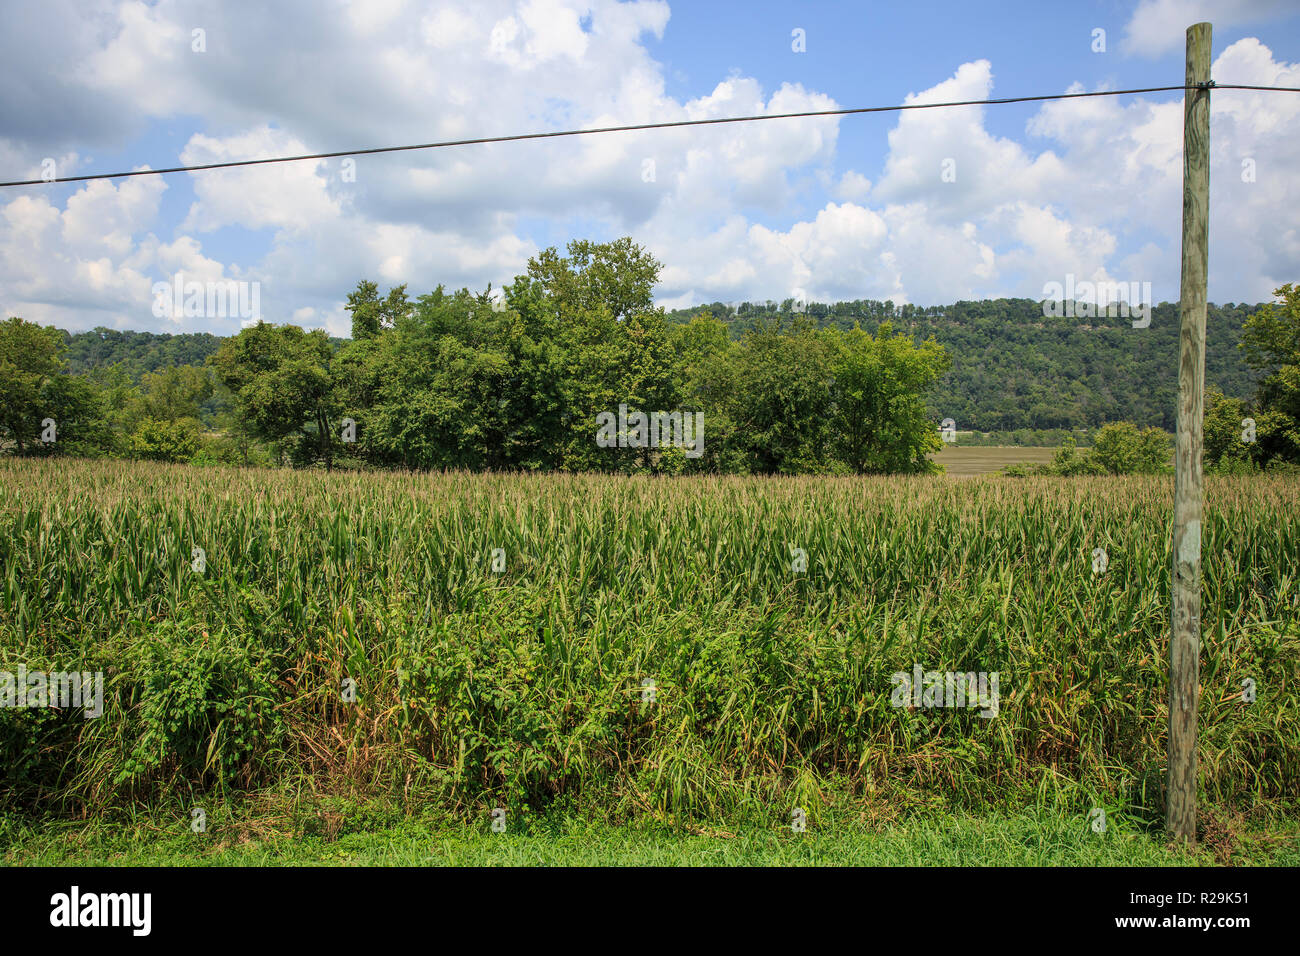 Roadside view of corn field with telephone lines in teh foregraound. Stock Photo